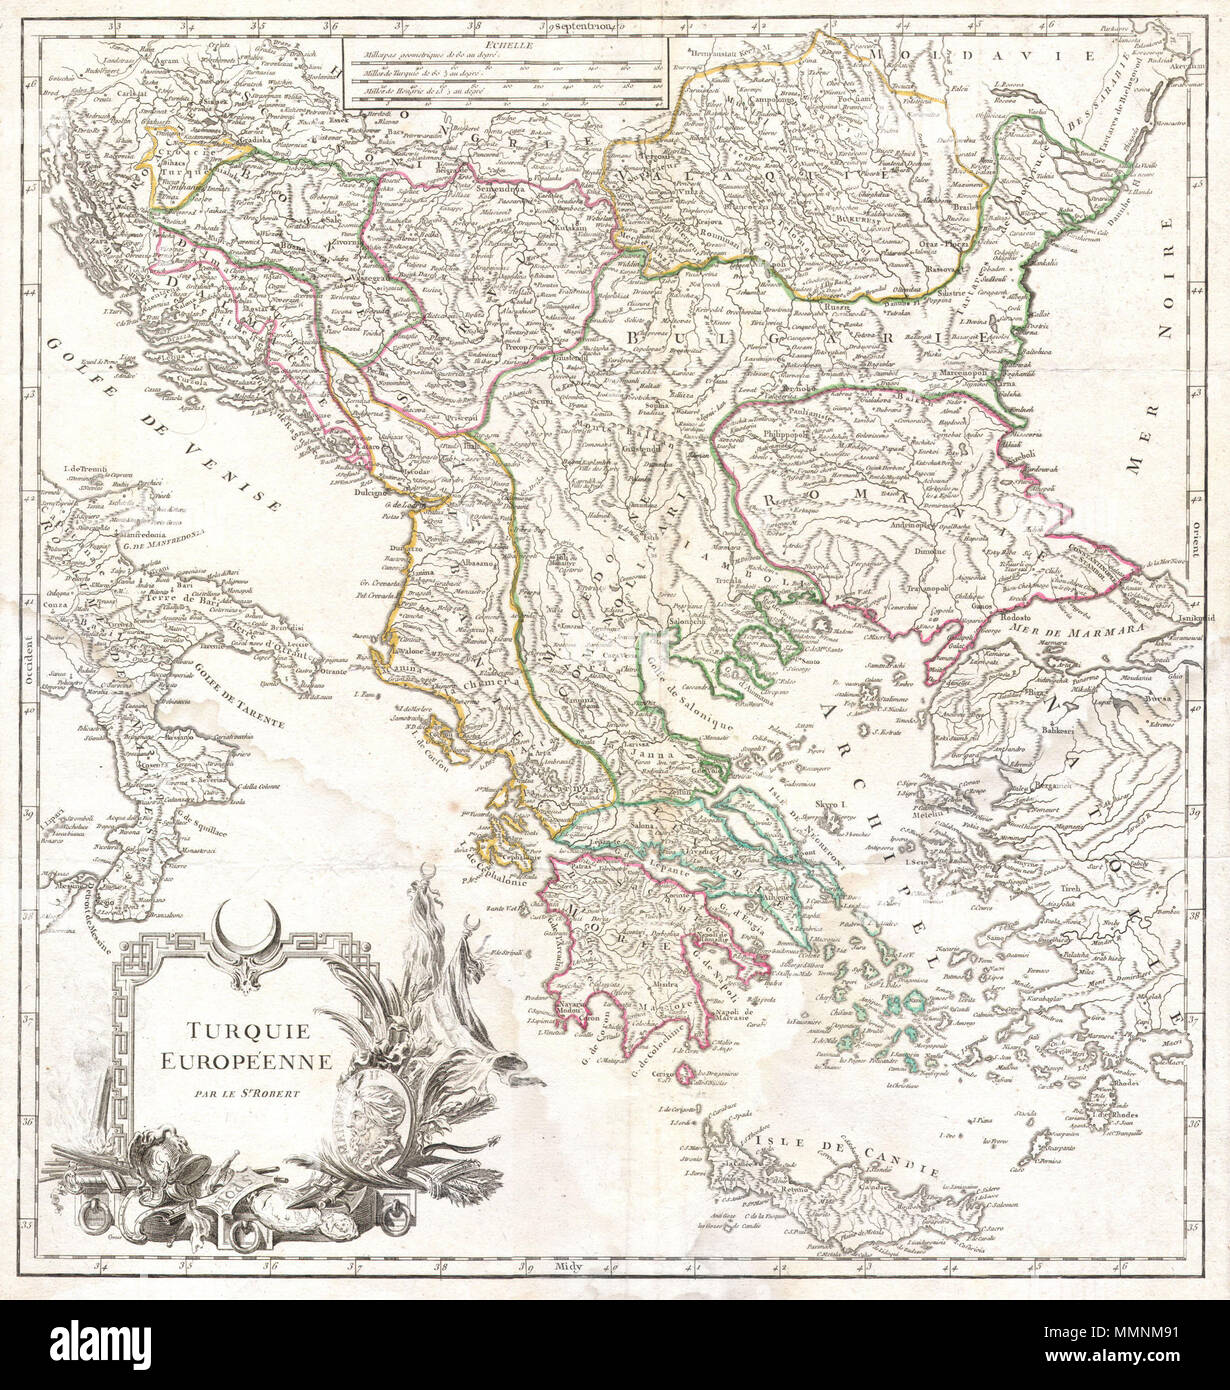 .  English: A beautiful map of Greece from De Vaugondy’s 1752 Atlas Universal. Depicts the whole of Greece from Bosnia and Croatia east to through Bulgaria and Romania to the Black Sea and south through Macedonia, Albania and the Pelopenesus to the Isle of Candia or Crete. Includes Parts of Anatolia (Turkey) and the boot of Italy. Bottom left decorated with an elaborate title cartouche. The Atlas Universal was one of the first atlases based upon actual surveys. Therefore, this map is highly accurate (for the period) and has most contemporary town names correct, though historic names are, in ma Stock Photo